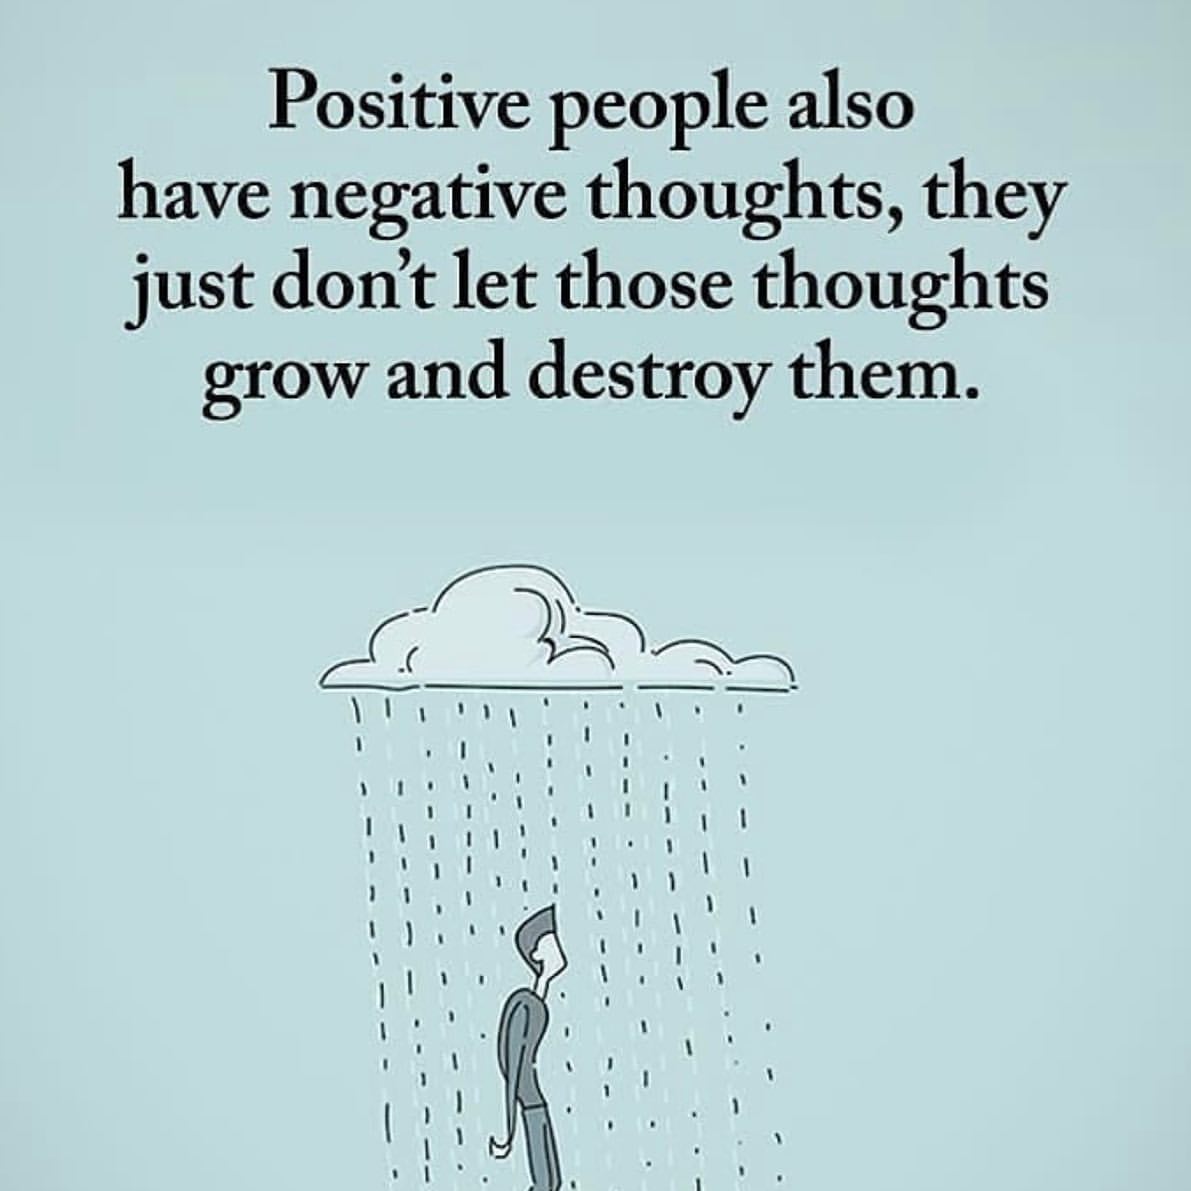 Positive people also have negative thoughts, they just don't let those thoughts grow and destroy them.